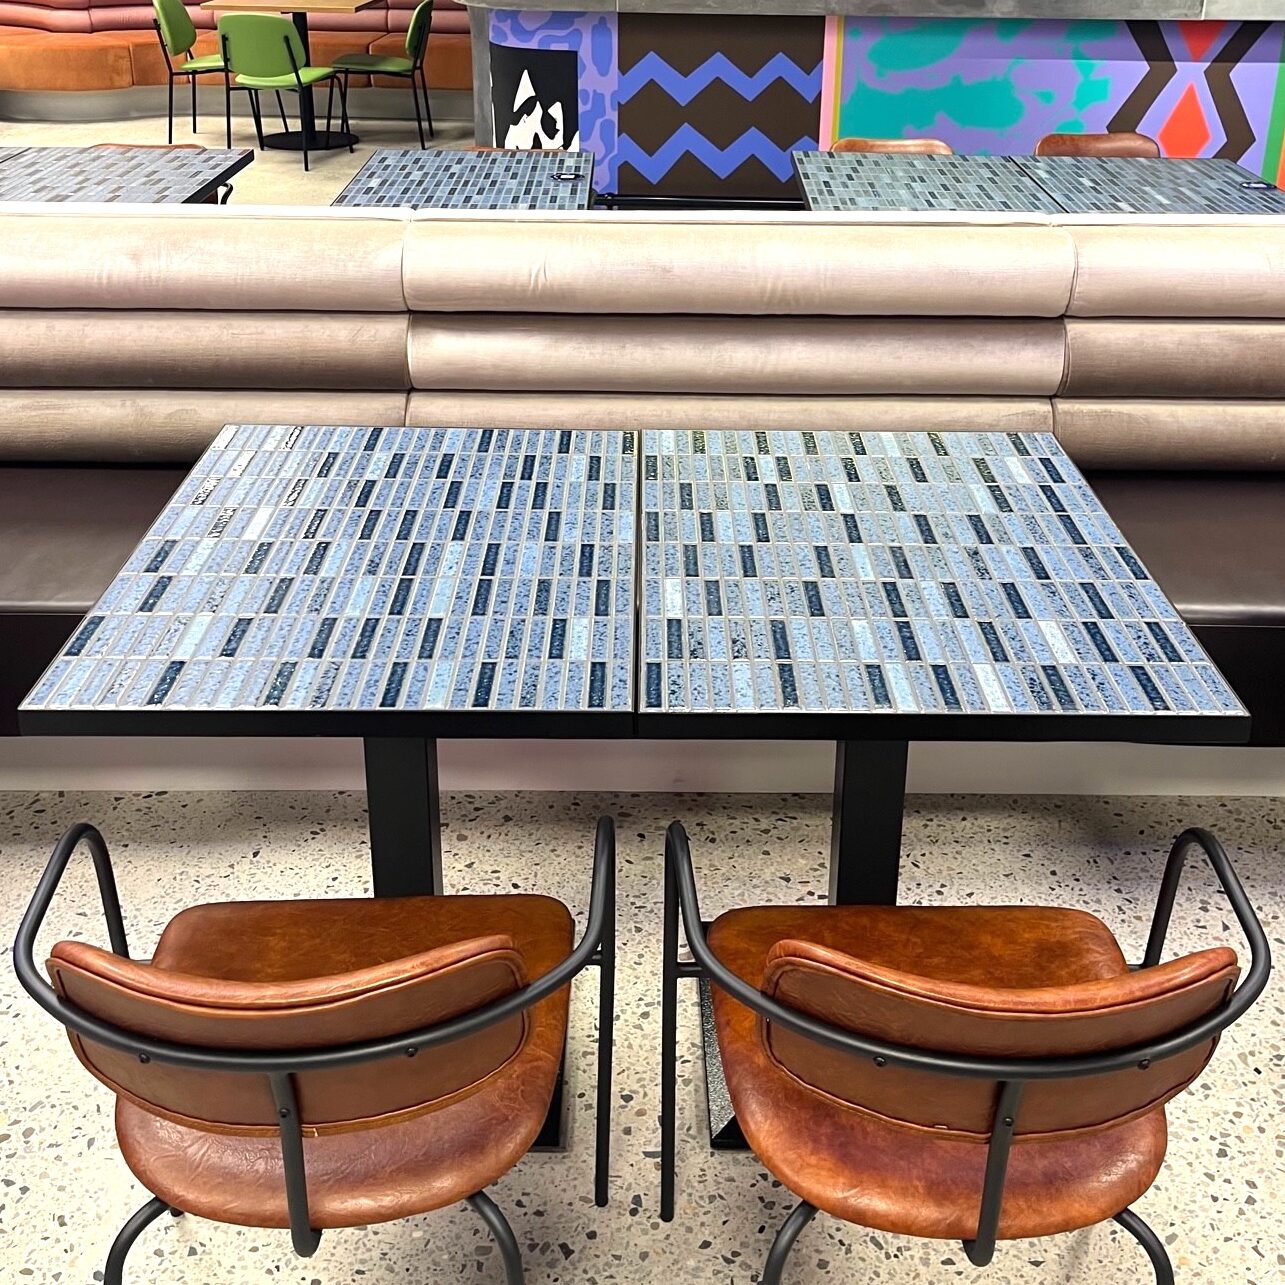 Tiled table top with steel edging are more durable and protect the tiled edges.